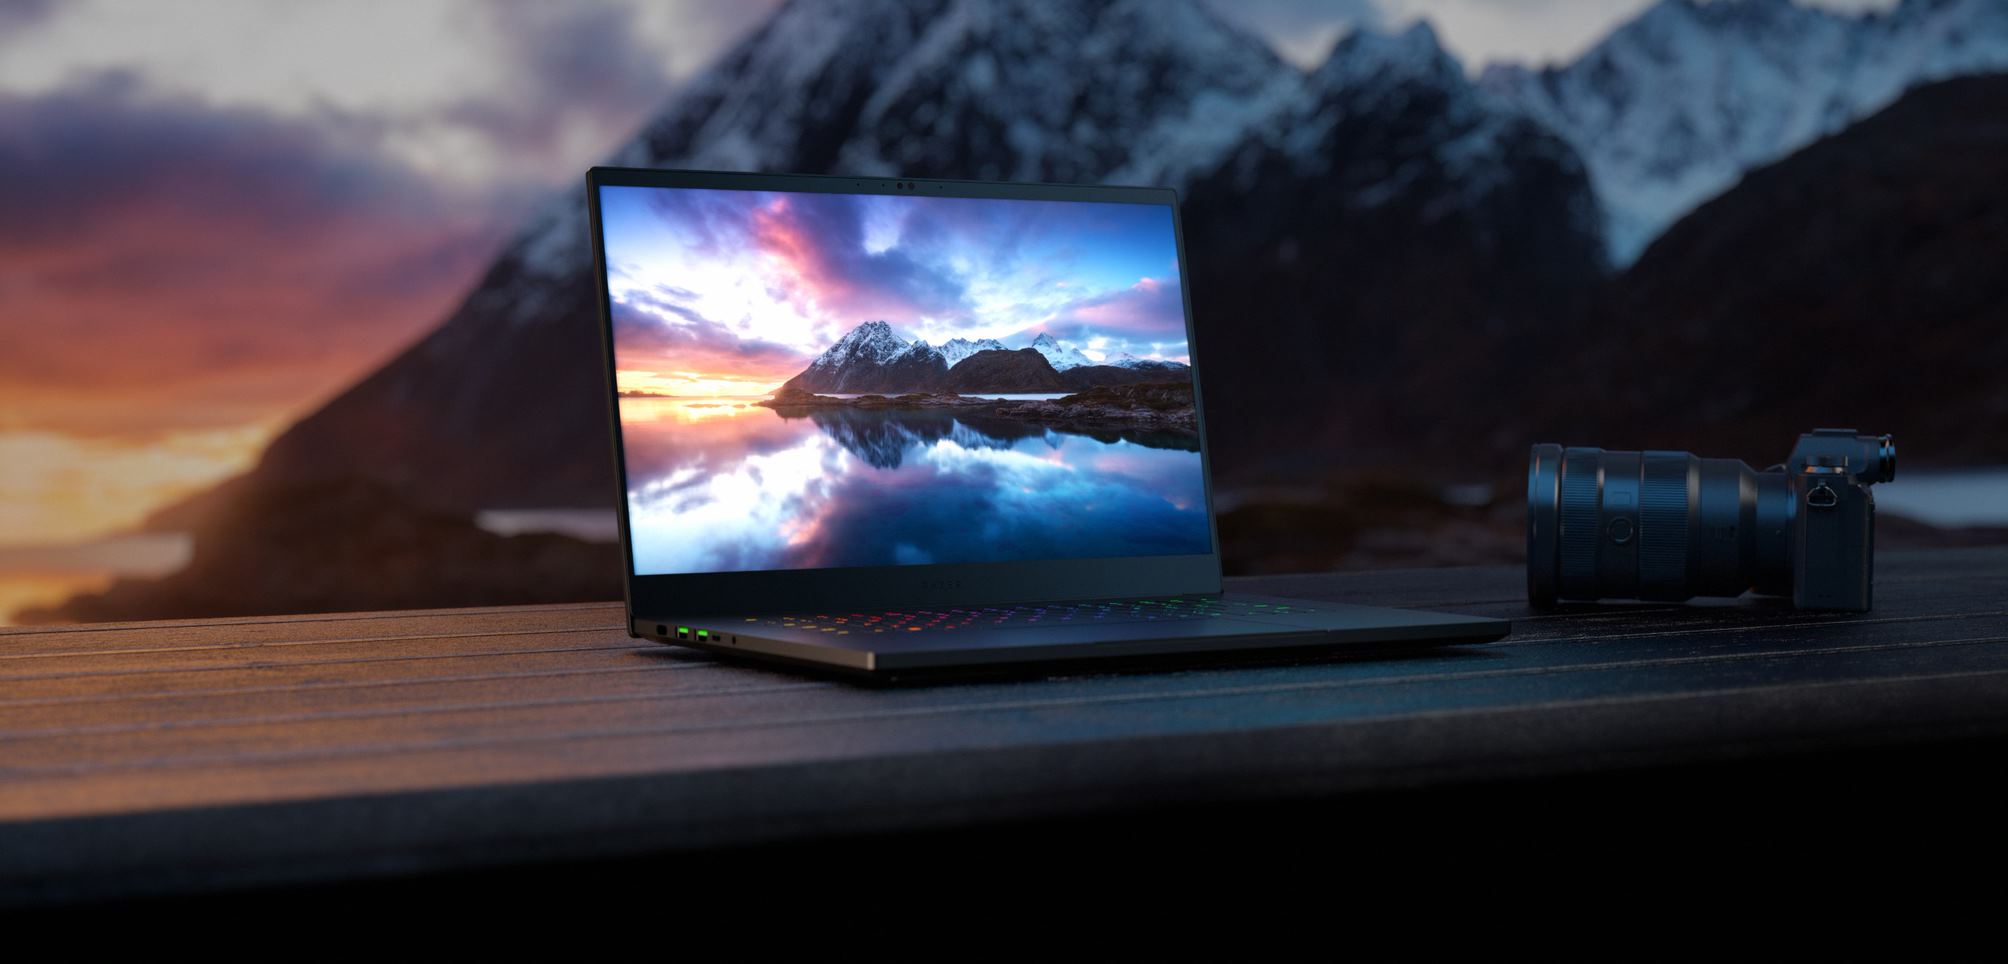 The Razer Blade 15’s 240Hz OLED panel pushes notebook computer displays to unusual frontiers